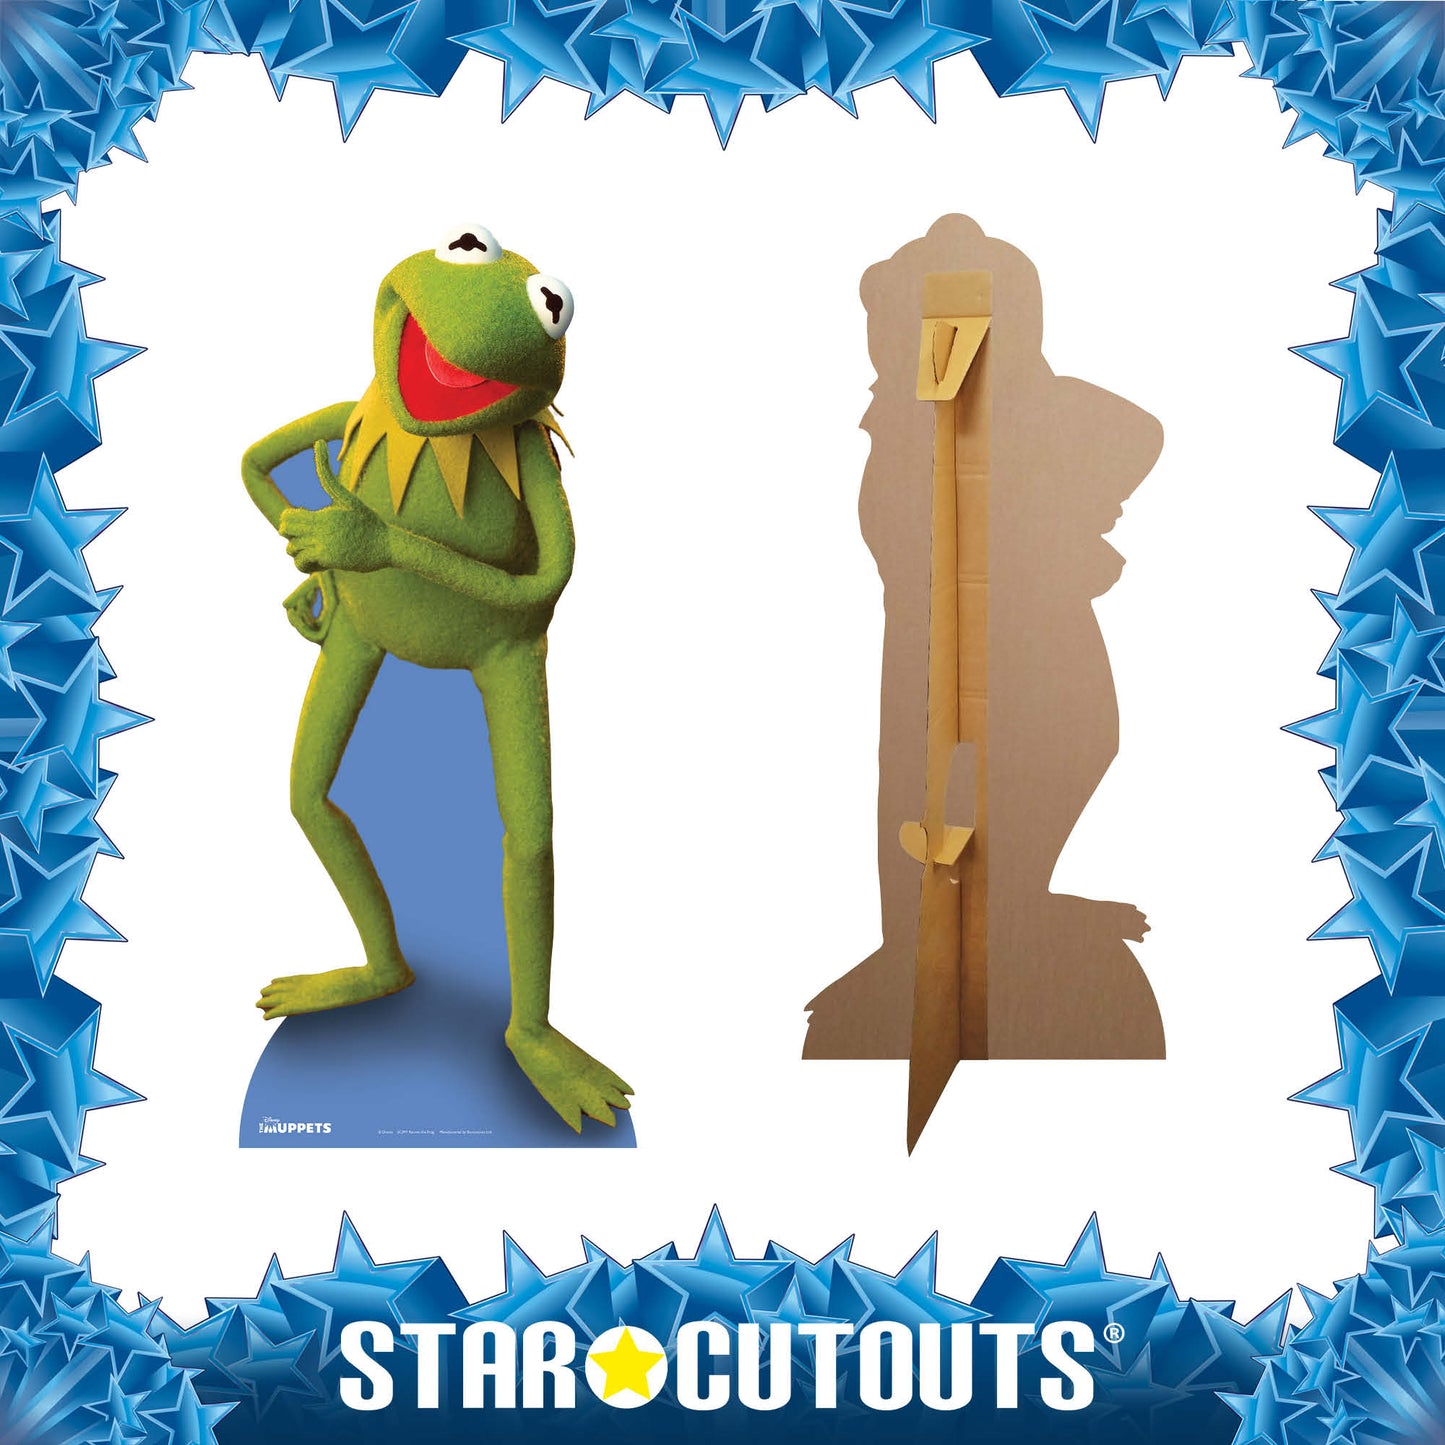 SC397 Kermit the Frog Cardboard Cut Out Height 133cm